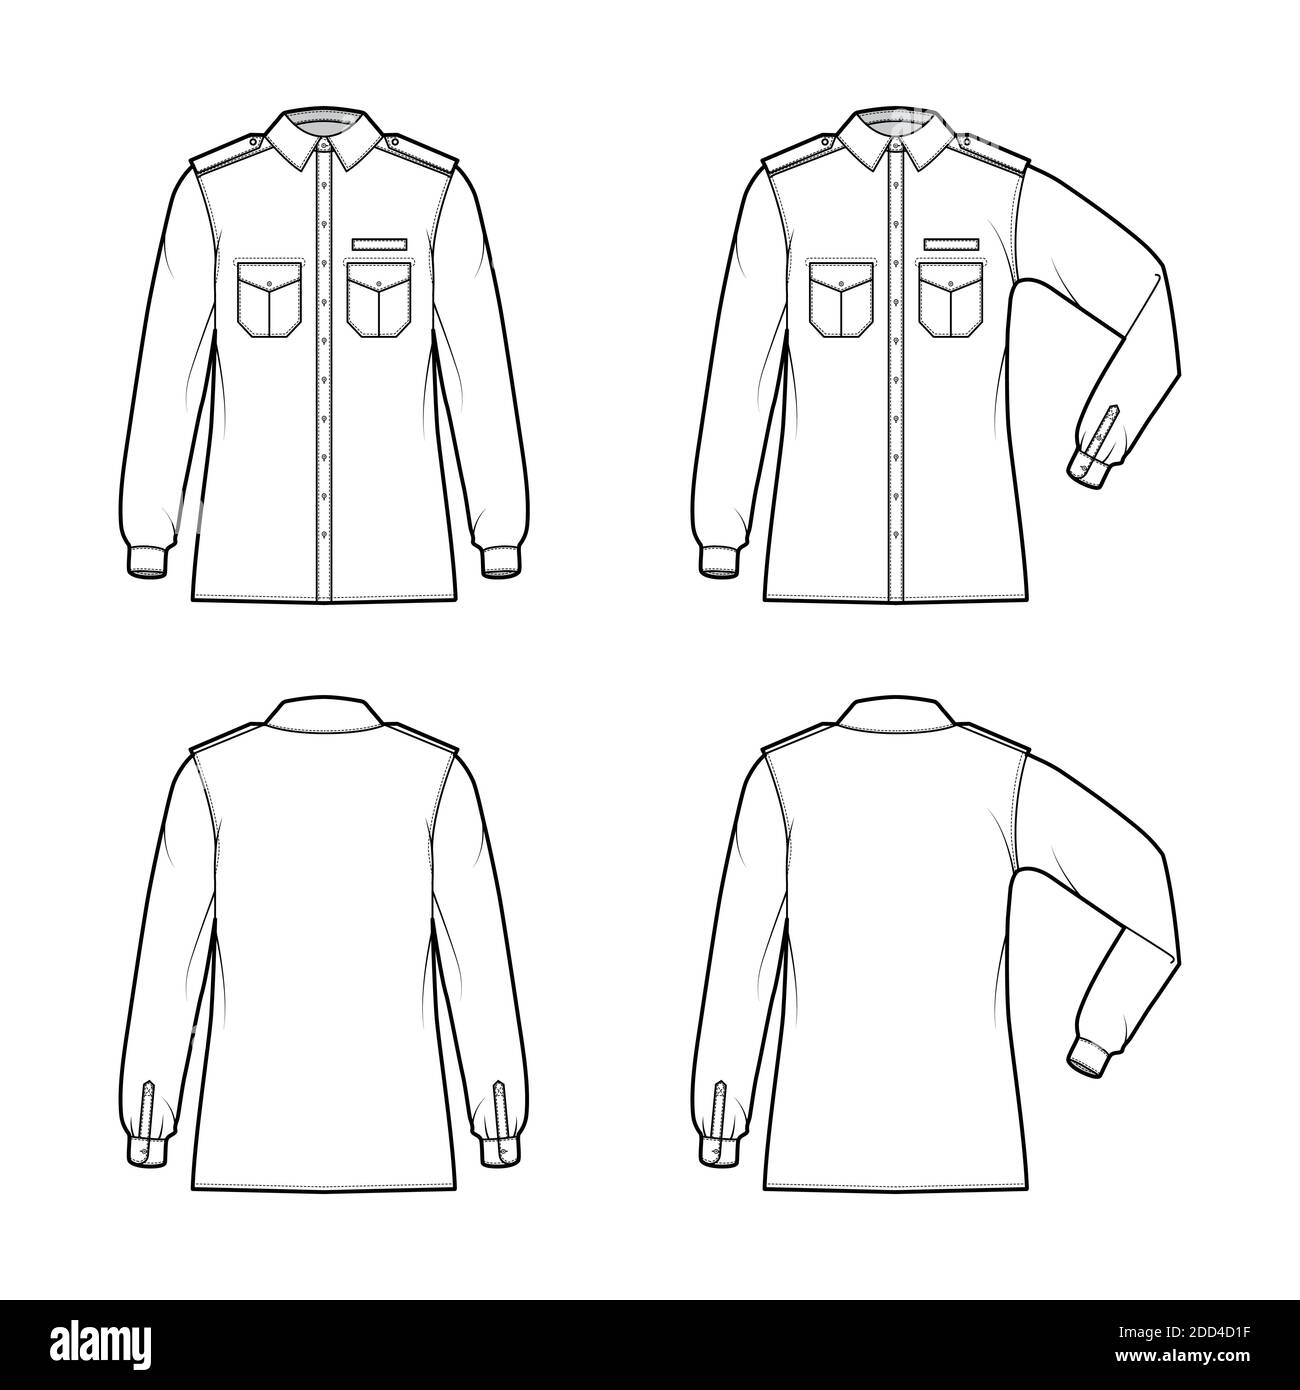 Shirt Military Technical Fashion Illustration With Epaulette, Flaps Angled  Pockets, Elbow Fold Long Sleeve, Relax Fit, Button-Down, Collar. Flat  Template Front, Back White Color. Women Men Unisex Top Stock Vector Image &